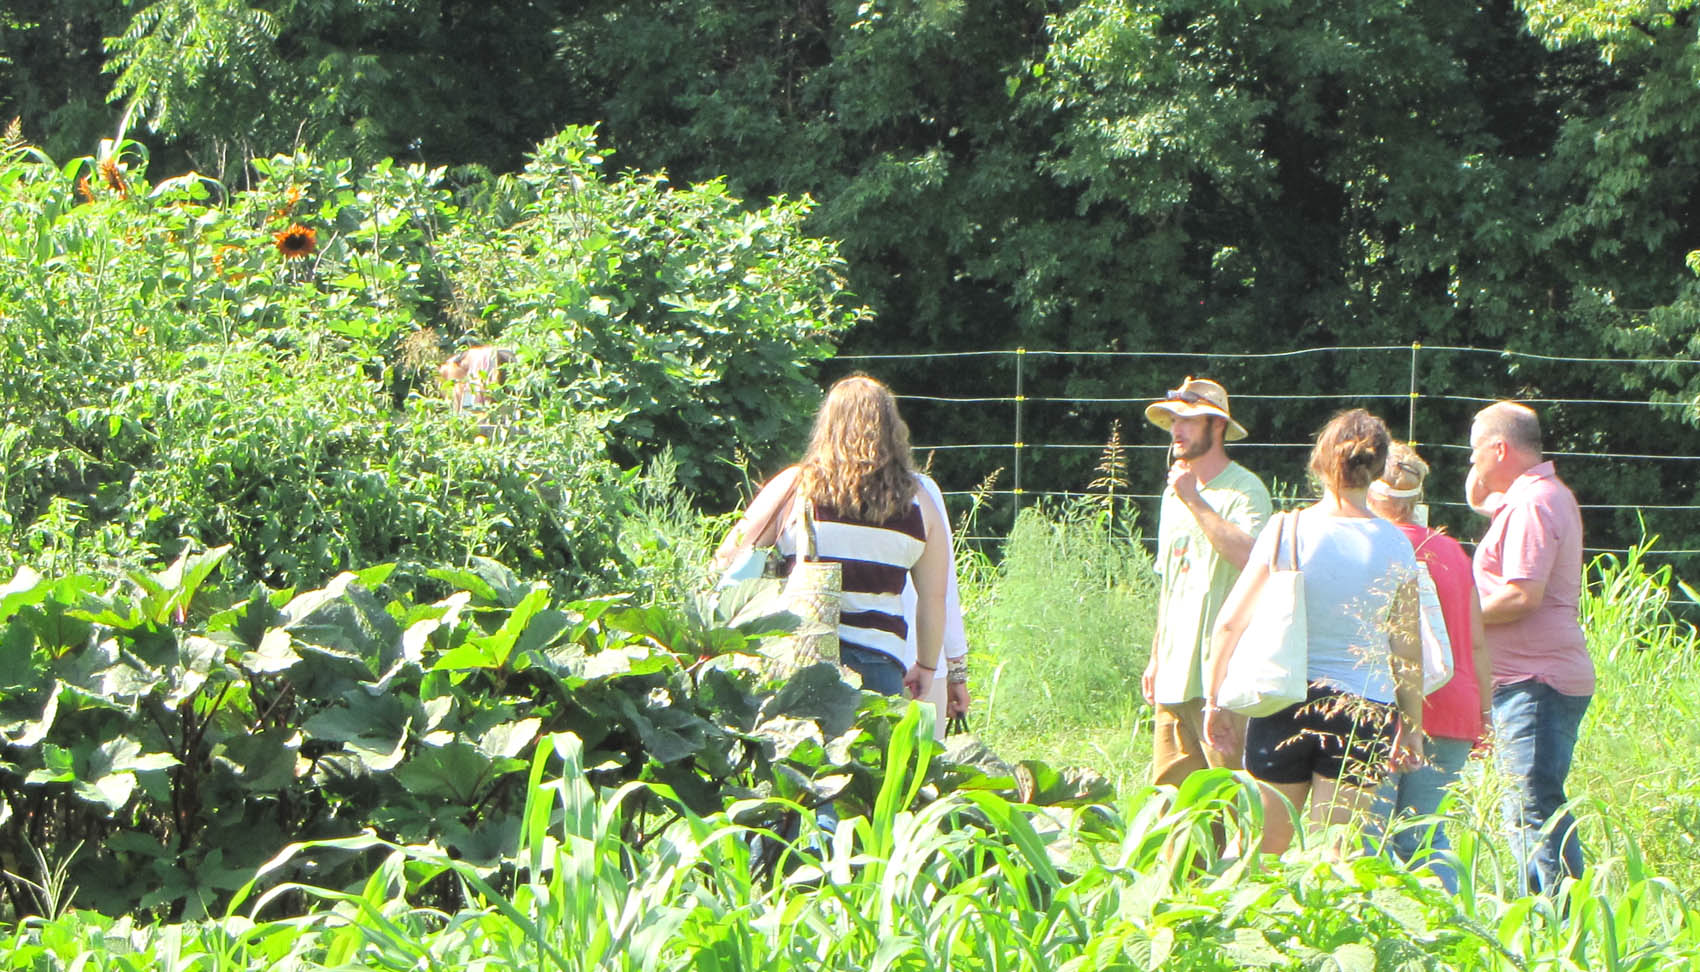 Read the full story, CCCC hosts Sustainable Culinary Arts & Farm Tour event